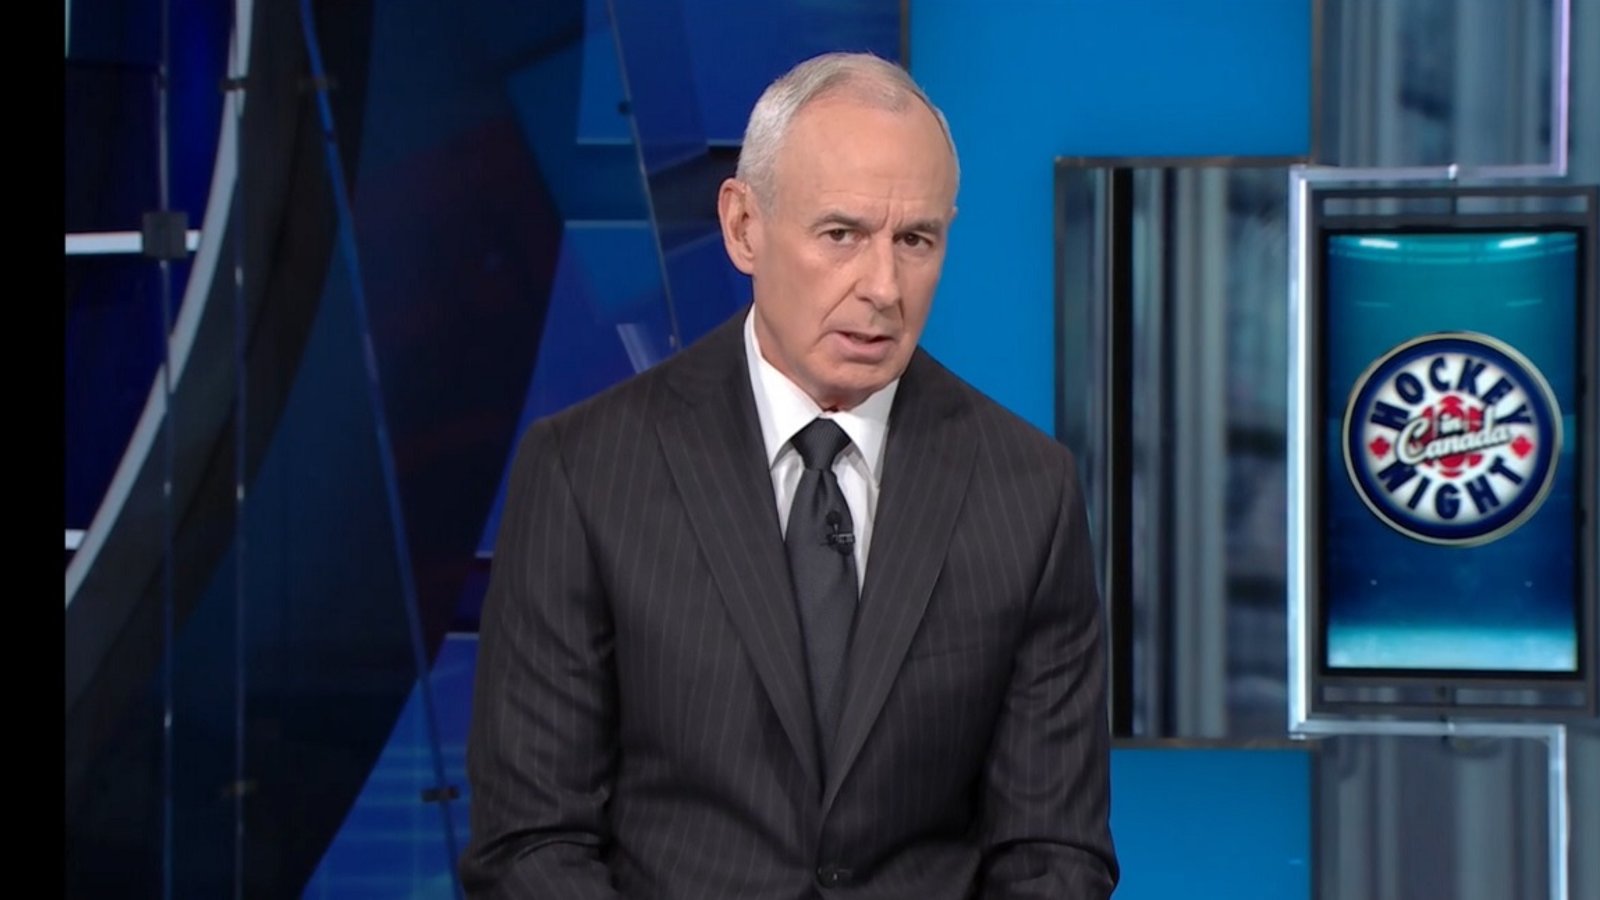 Ron MacLean attempts to apologize to fans on Hockey Night in Canada.